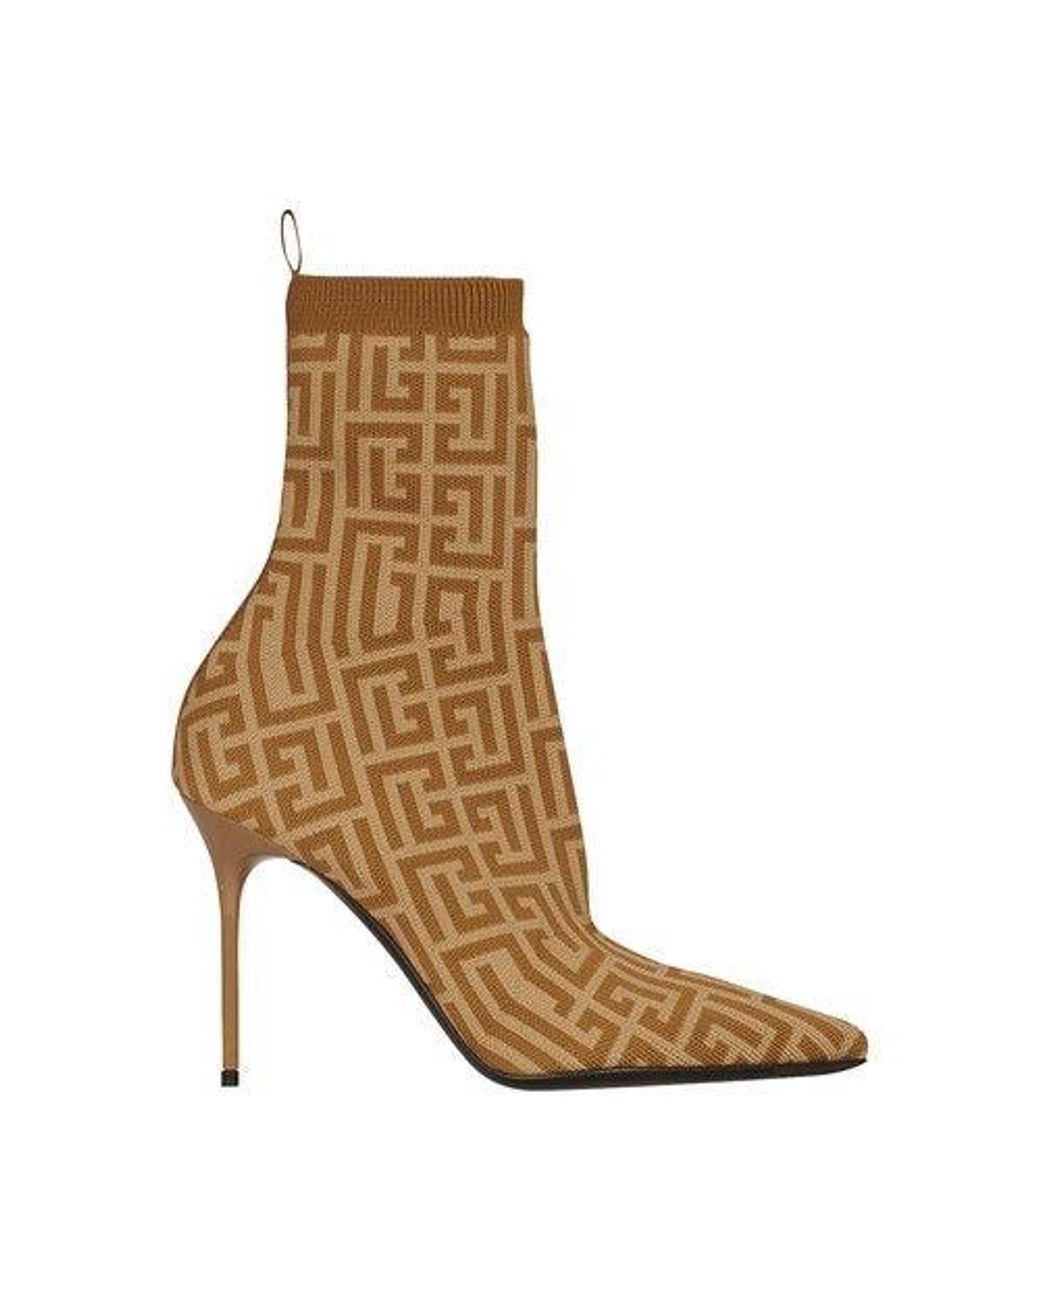 Balmain Stretch Knit Skye Ankle Boots With Monogram in Brown | Lyst